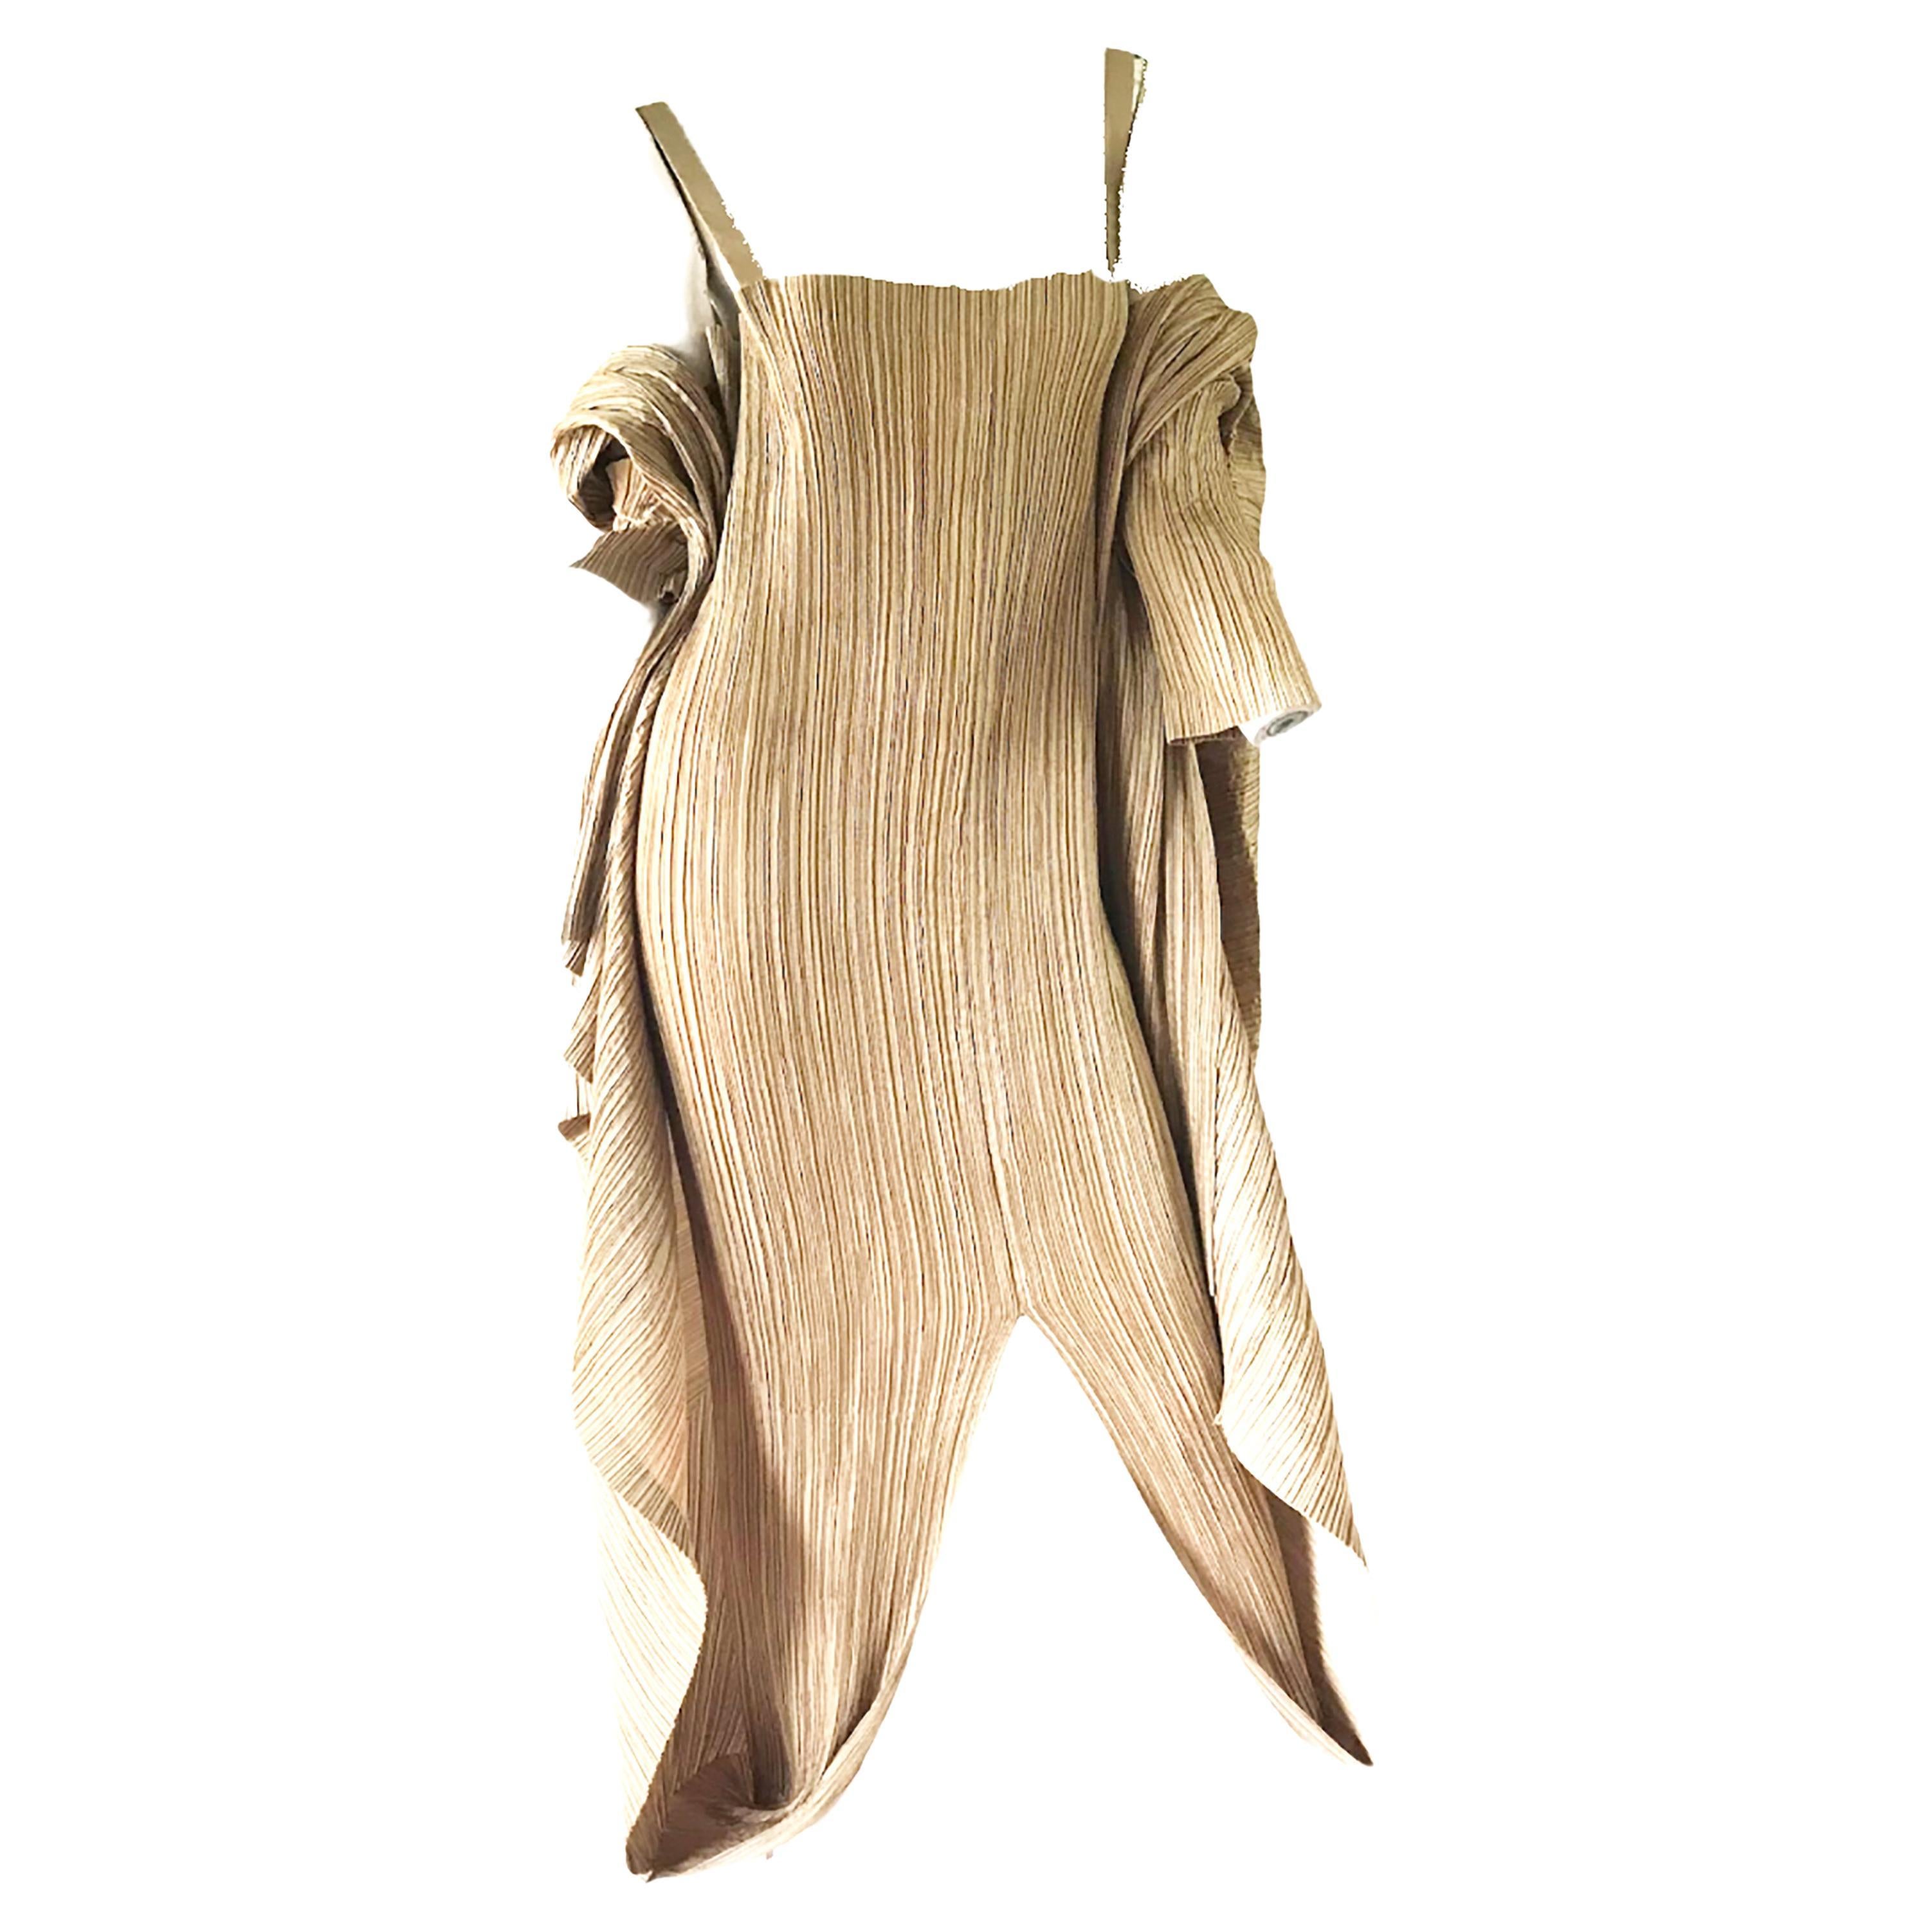 1990s ISSEY MIYAKE GOLD METALLIC PLEATED CAPE EVENING GOWN
Condition: Excellent
One size 

similar one seen in Miyake book shot by Irving Penn 